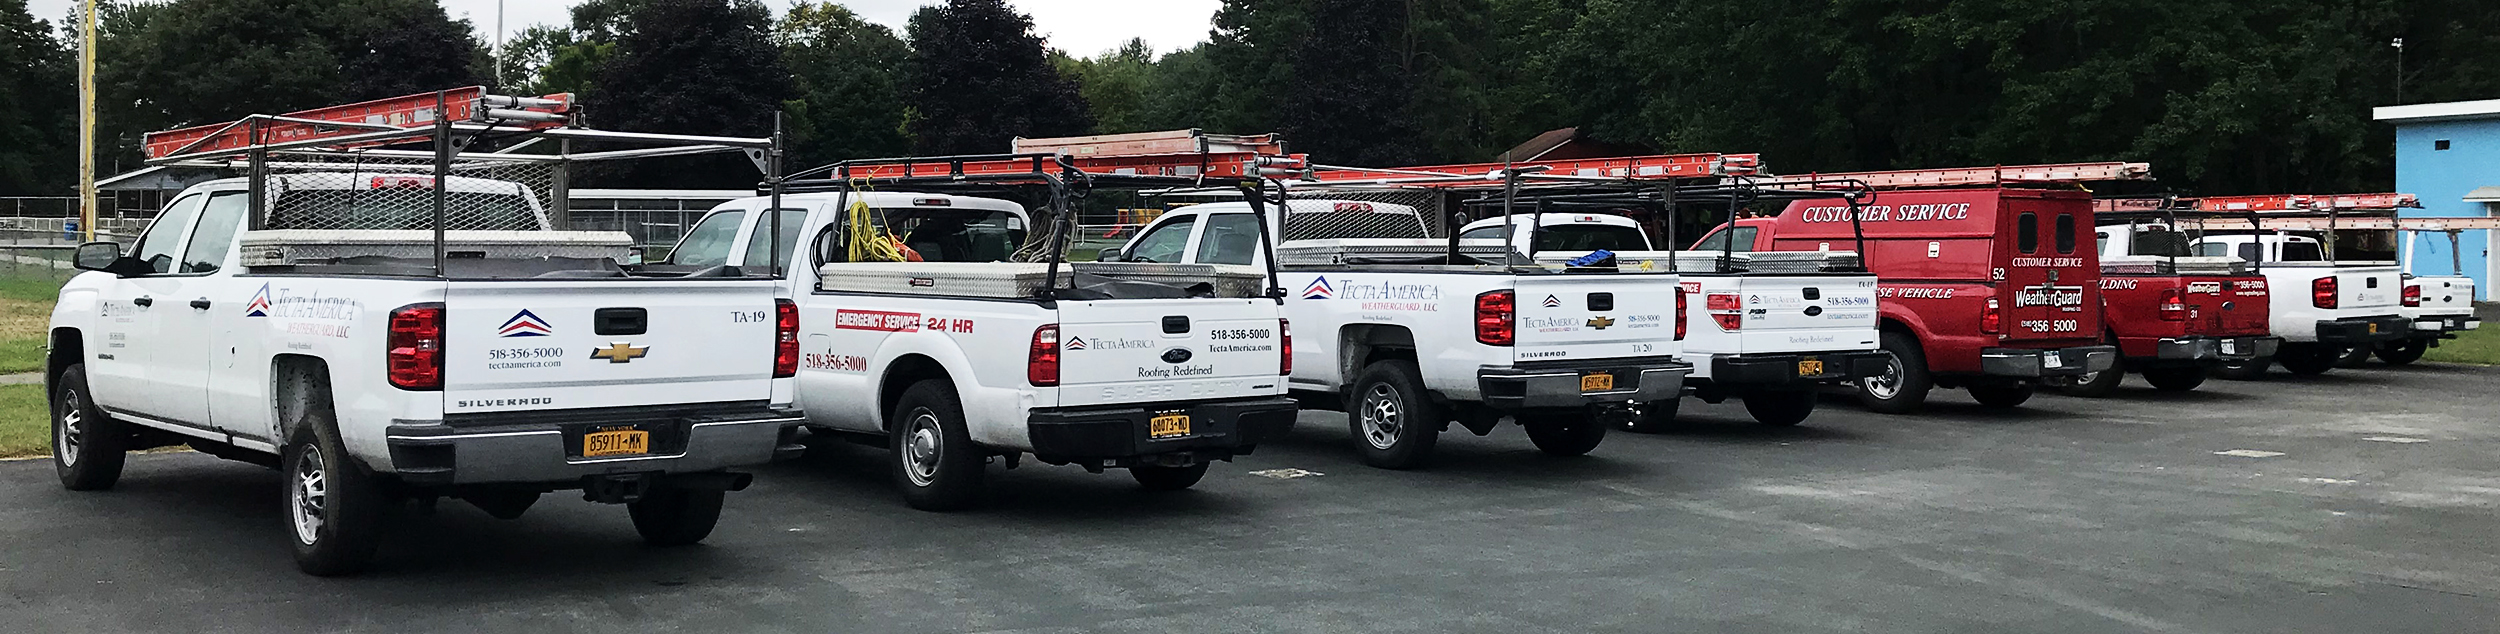 weatherguard commercial roofing in mew york